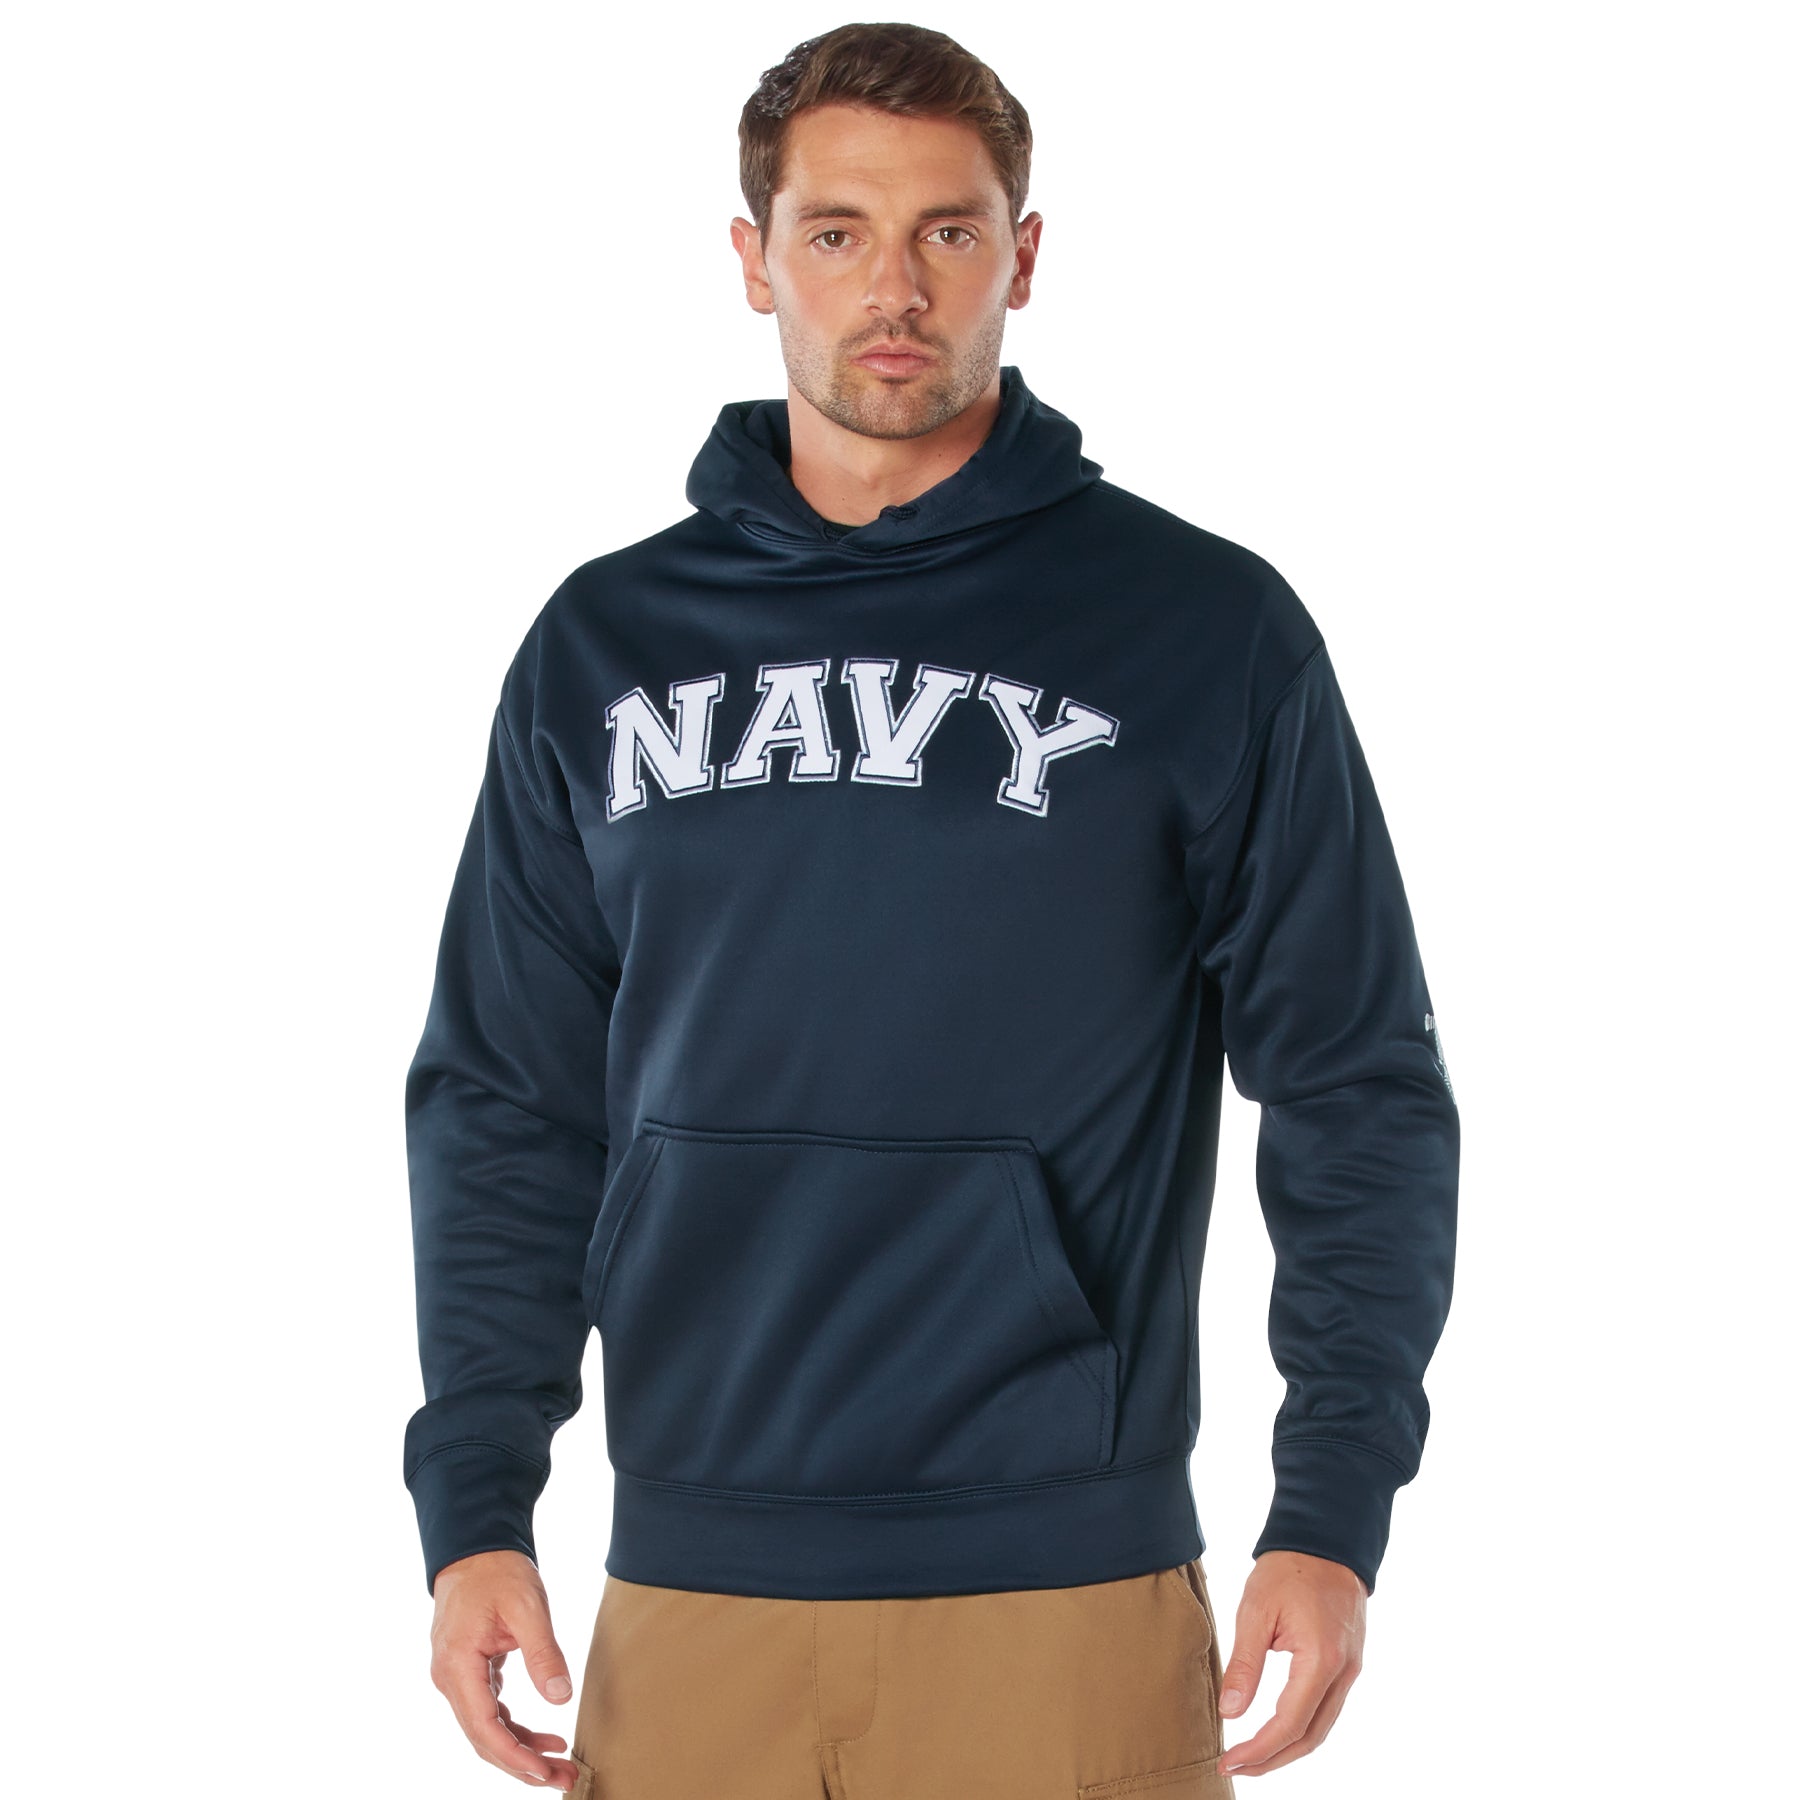 Poly Military Navy Embroidered Hooded Sweatshirts Navy Blue